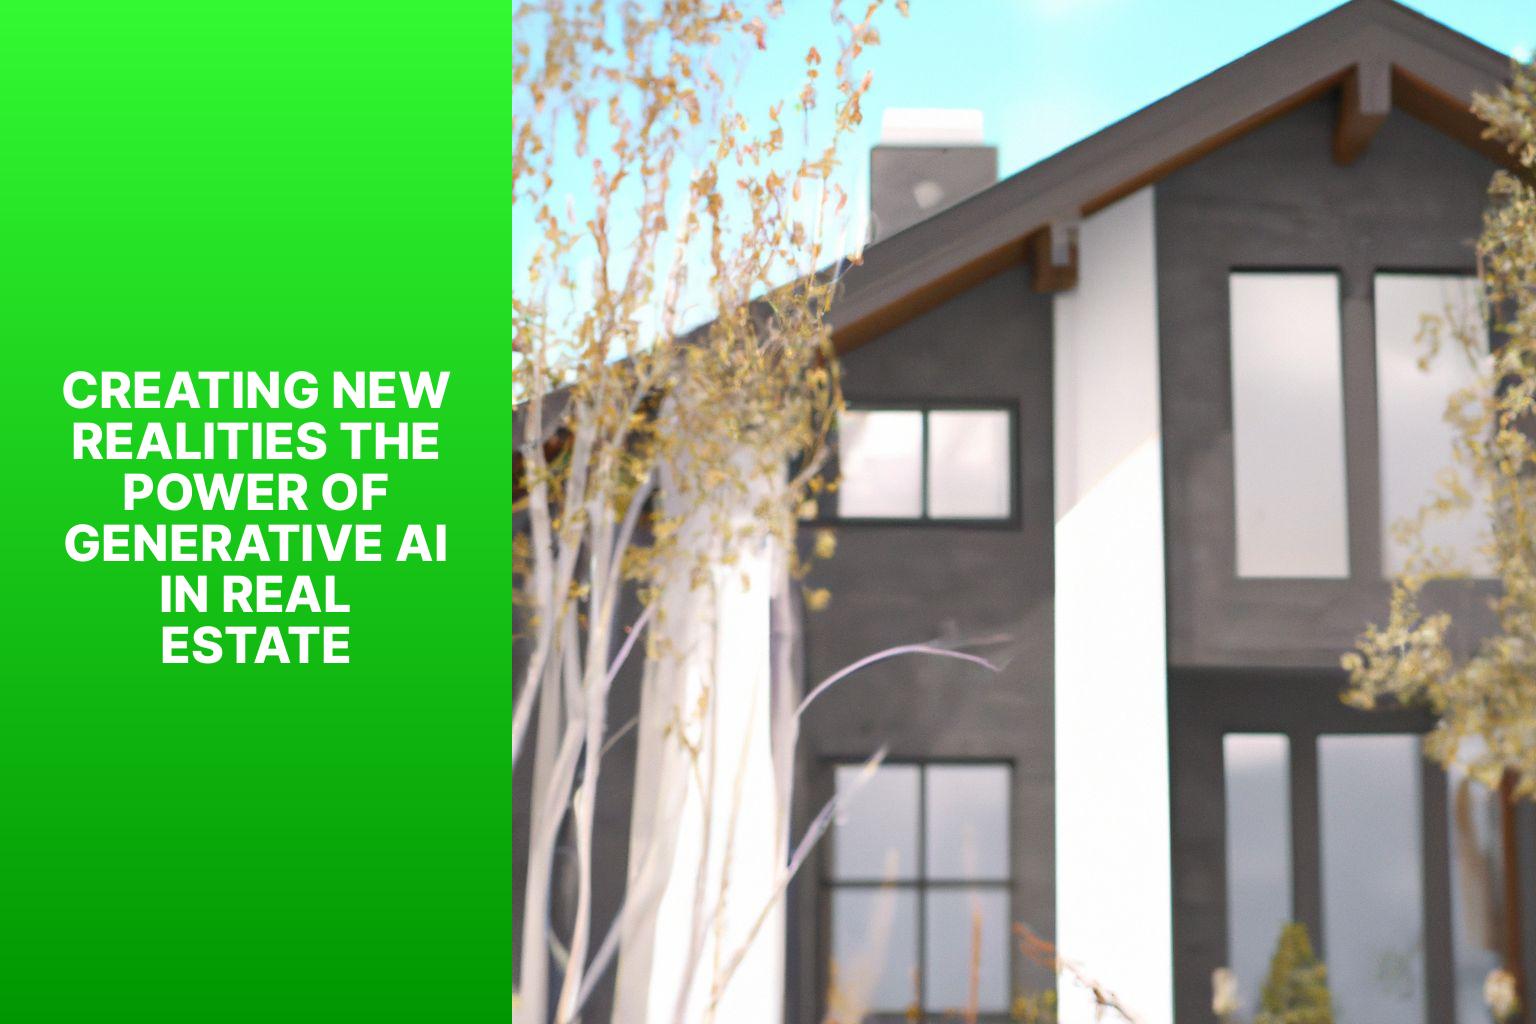 Creating New Realities The Power of Generative AI in Real Estate